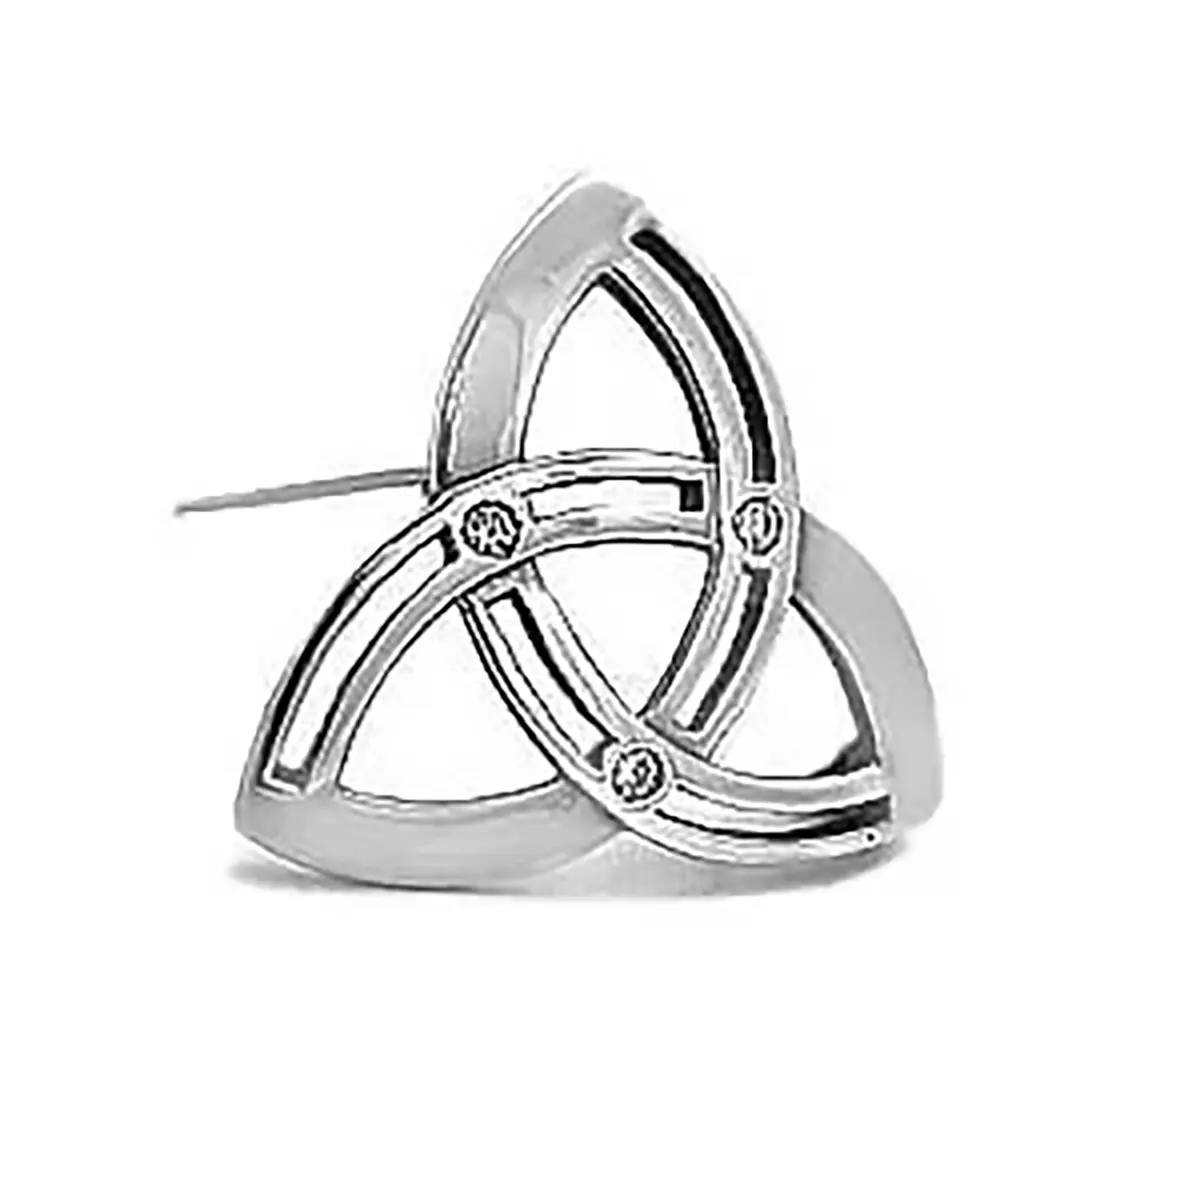 White Gold Trinity Knot Brooch